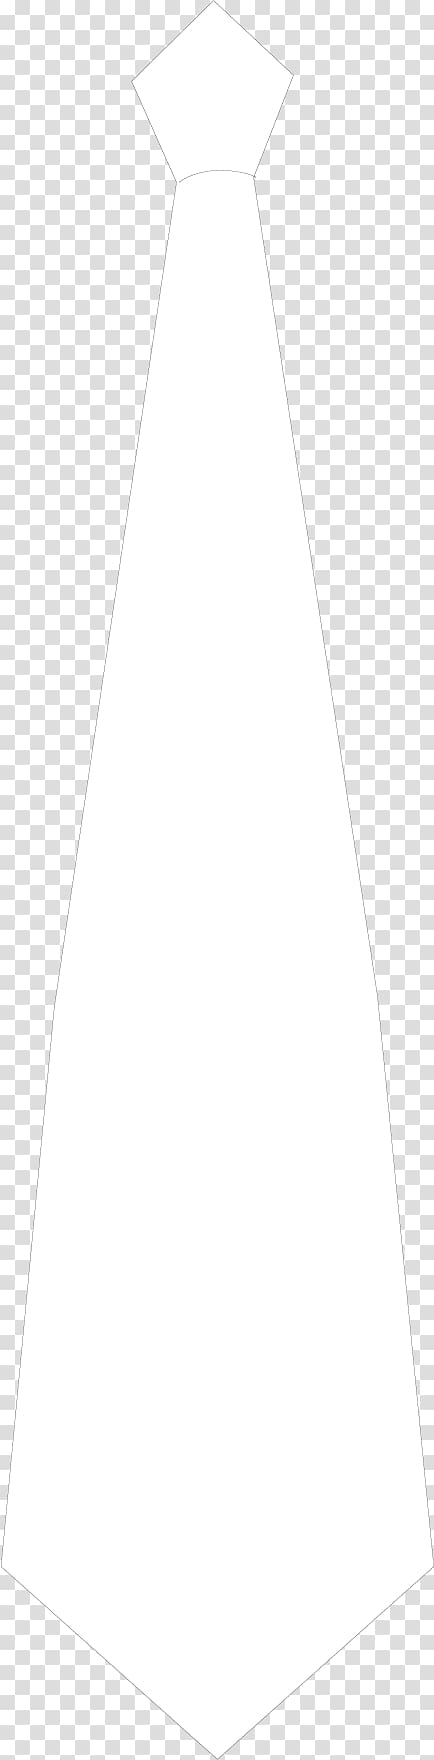 White tie Costume Designer Clothing, Approve the white tie design transparent background PNG clipart